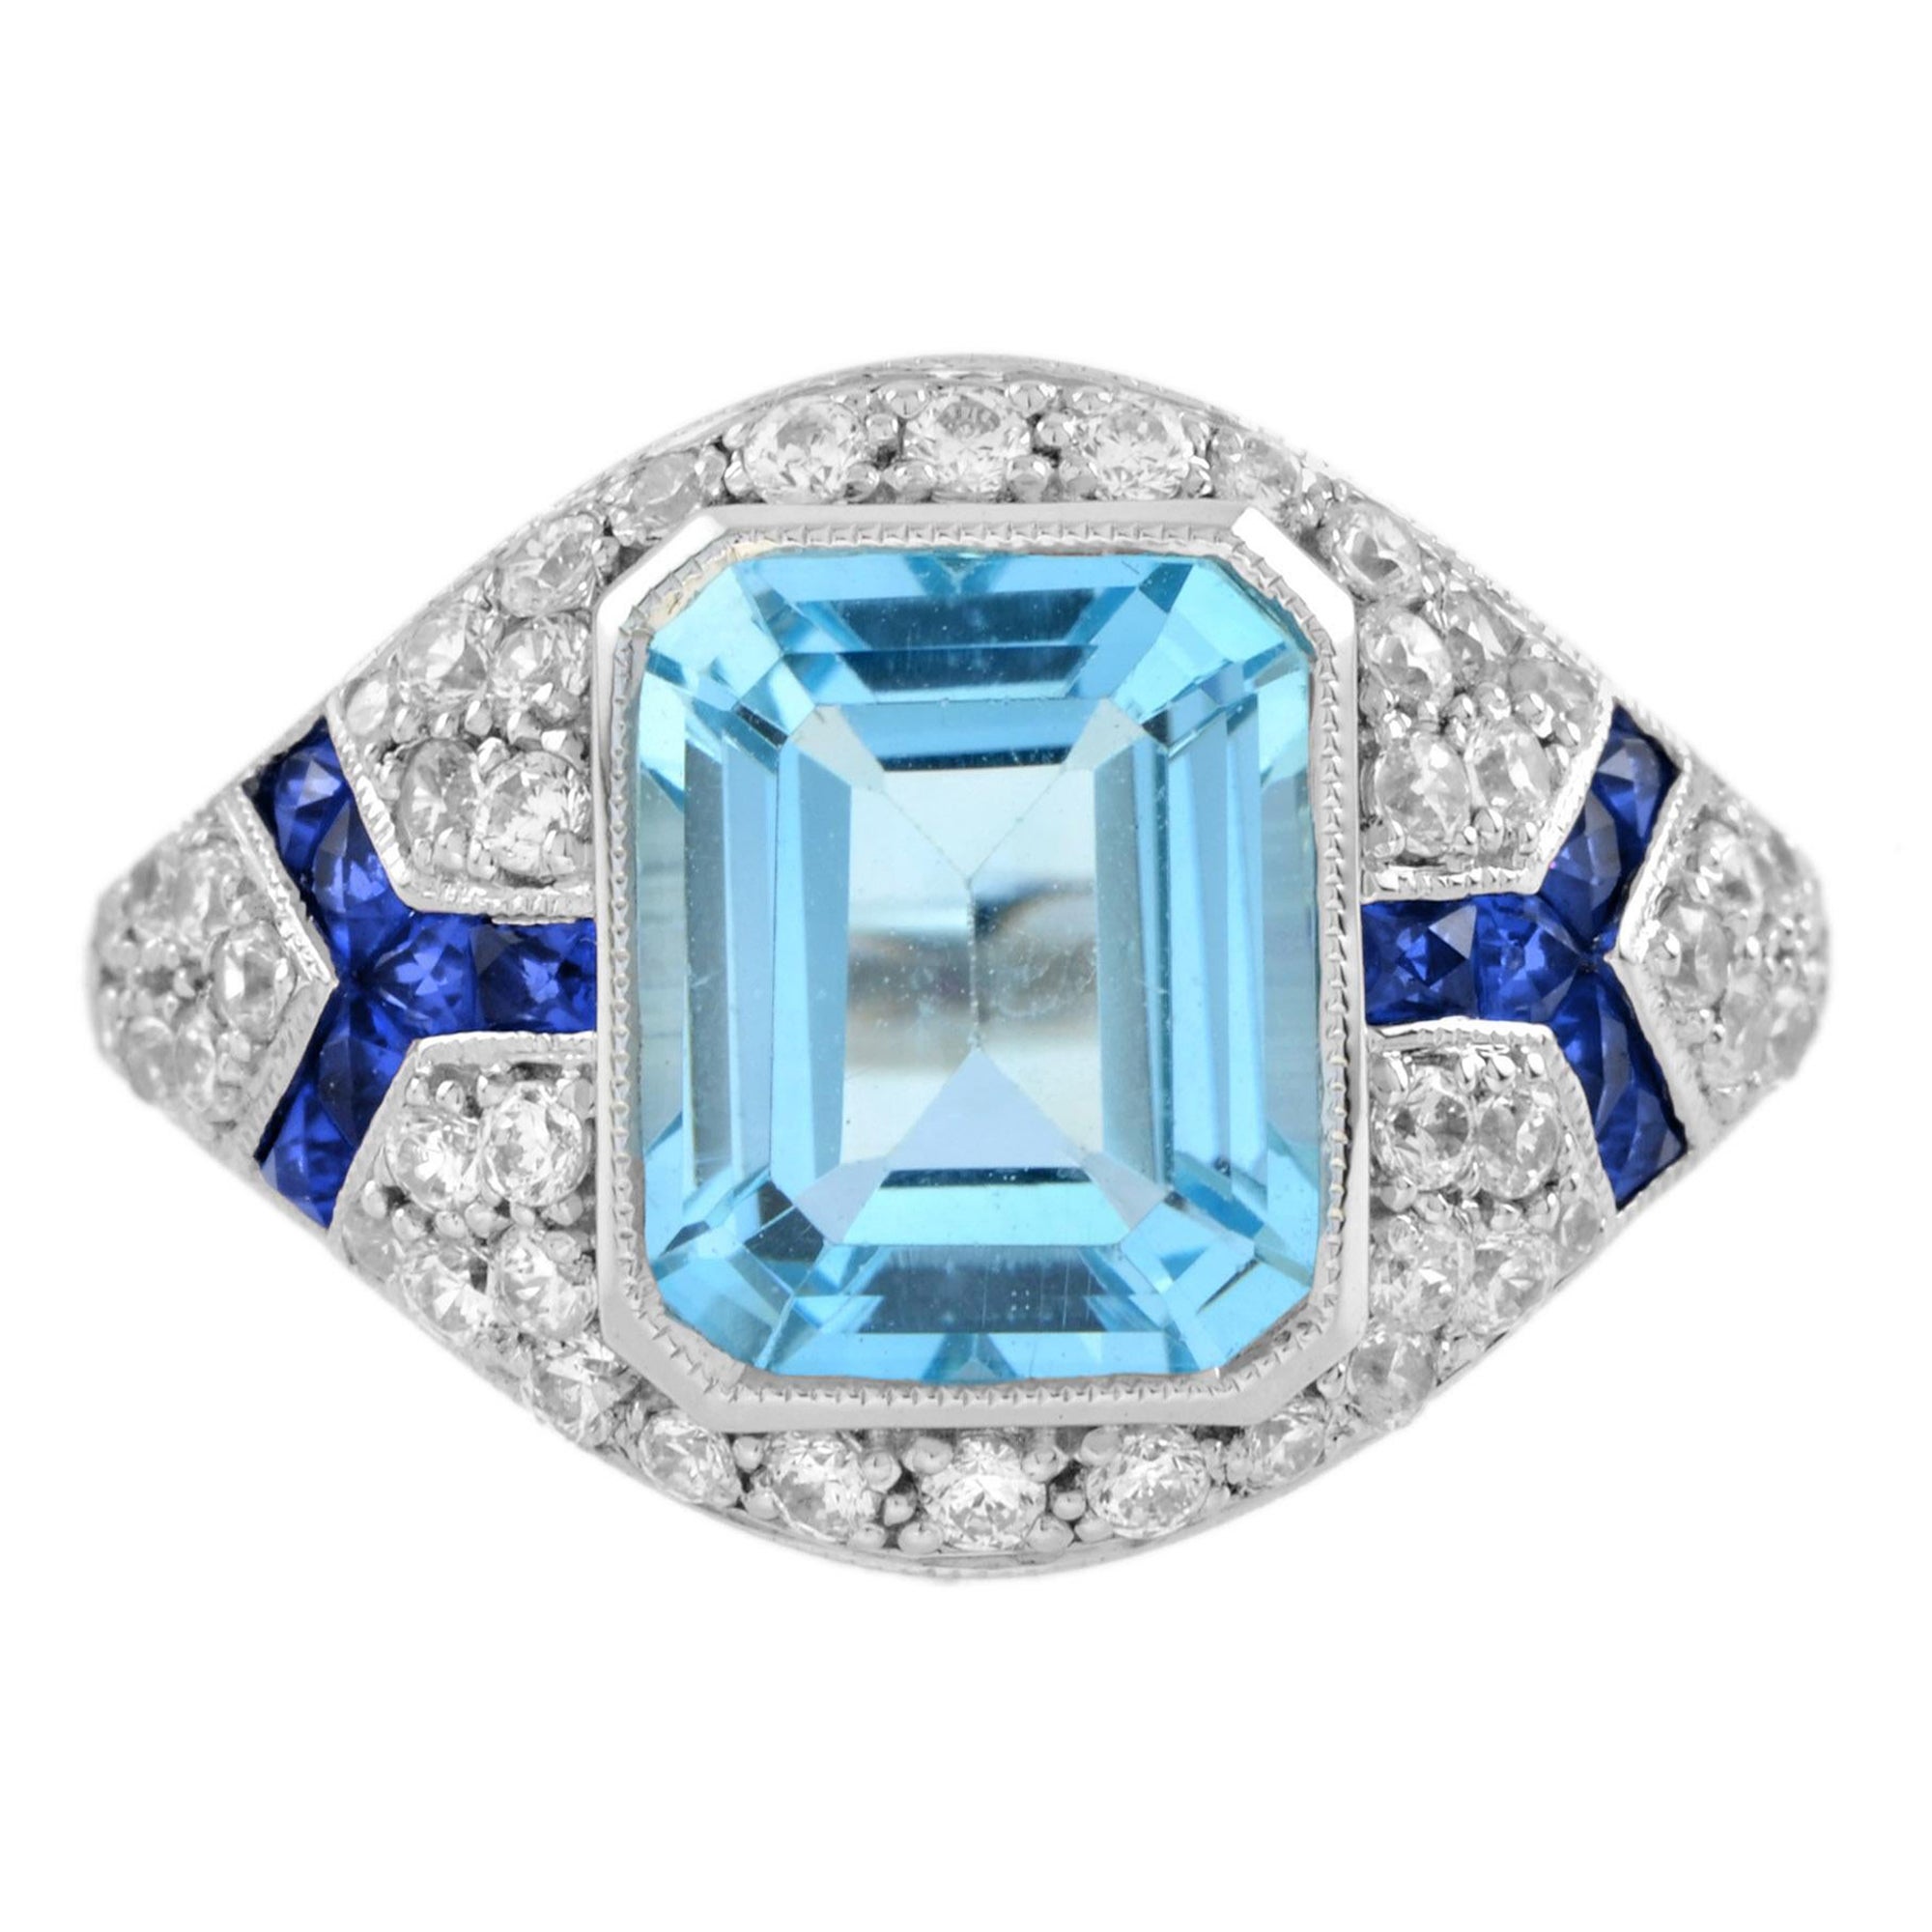 Blue Topaz with Diamond Sapphire Art Deco Style Engagement Ring in 18k Gold